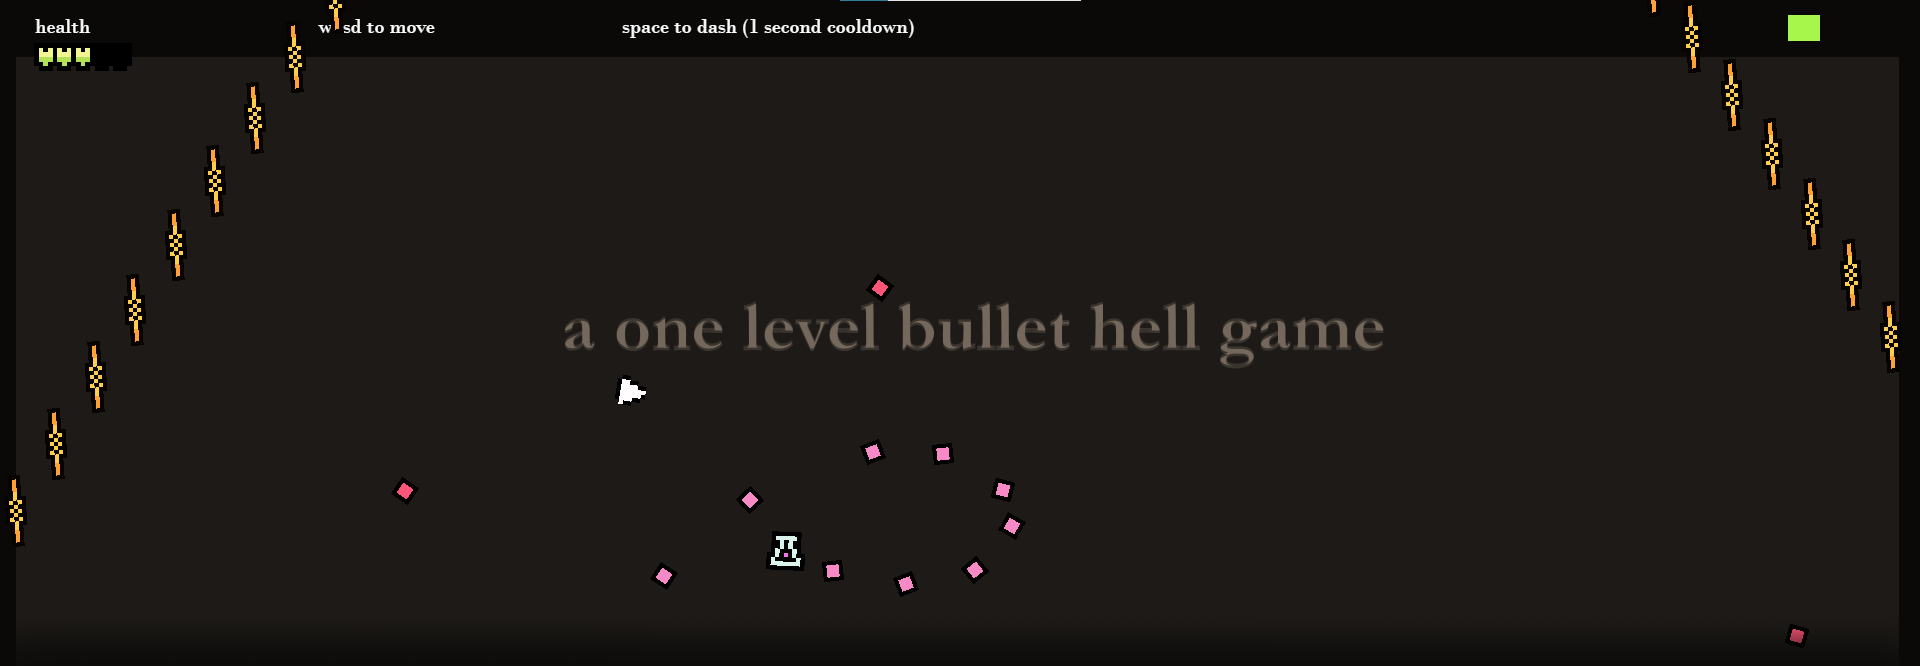 a one level bullet hell game